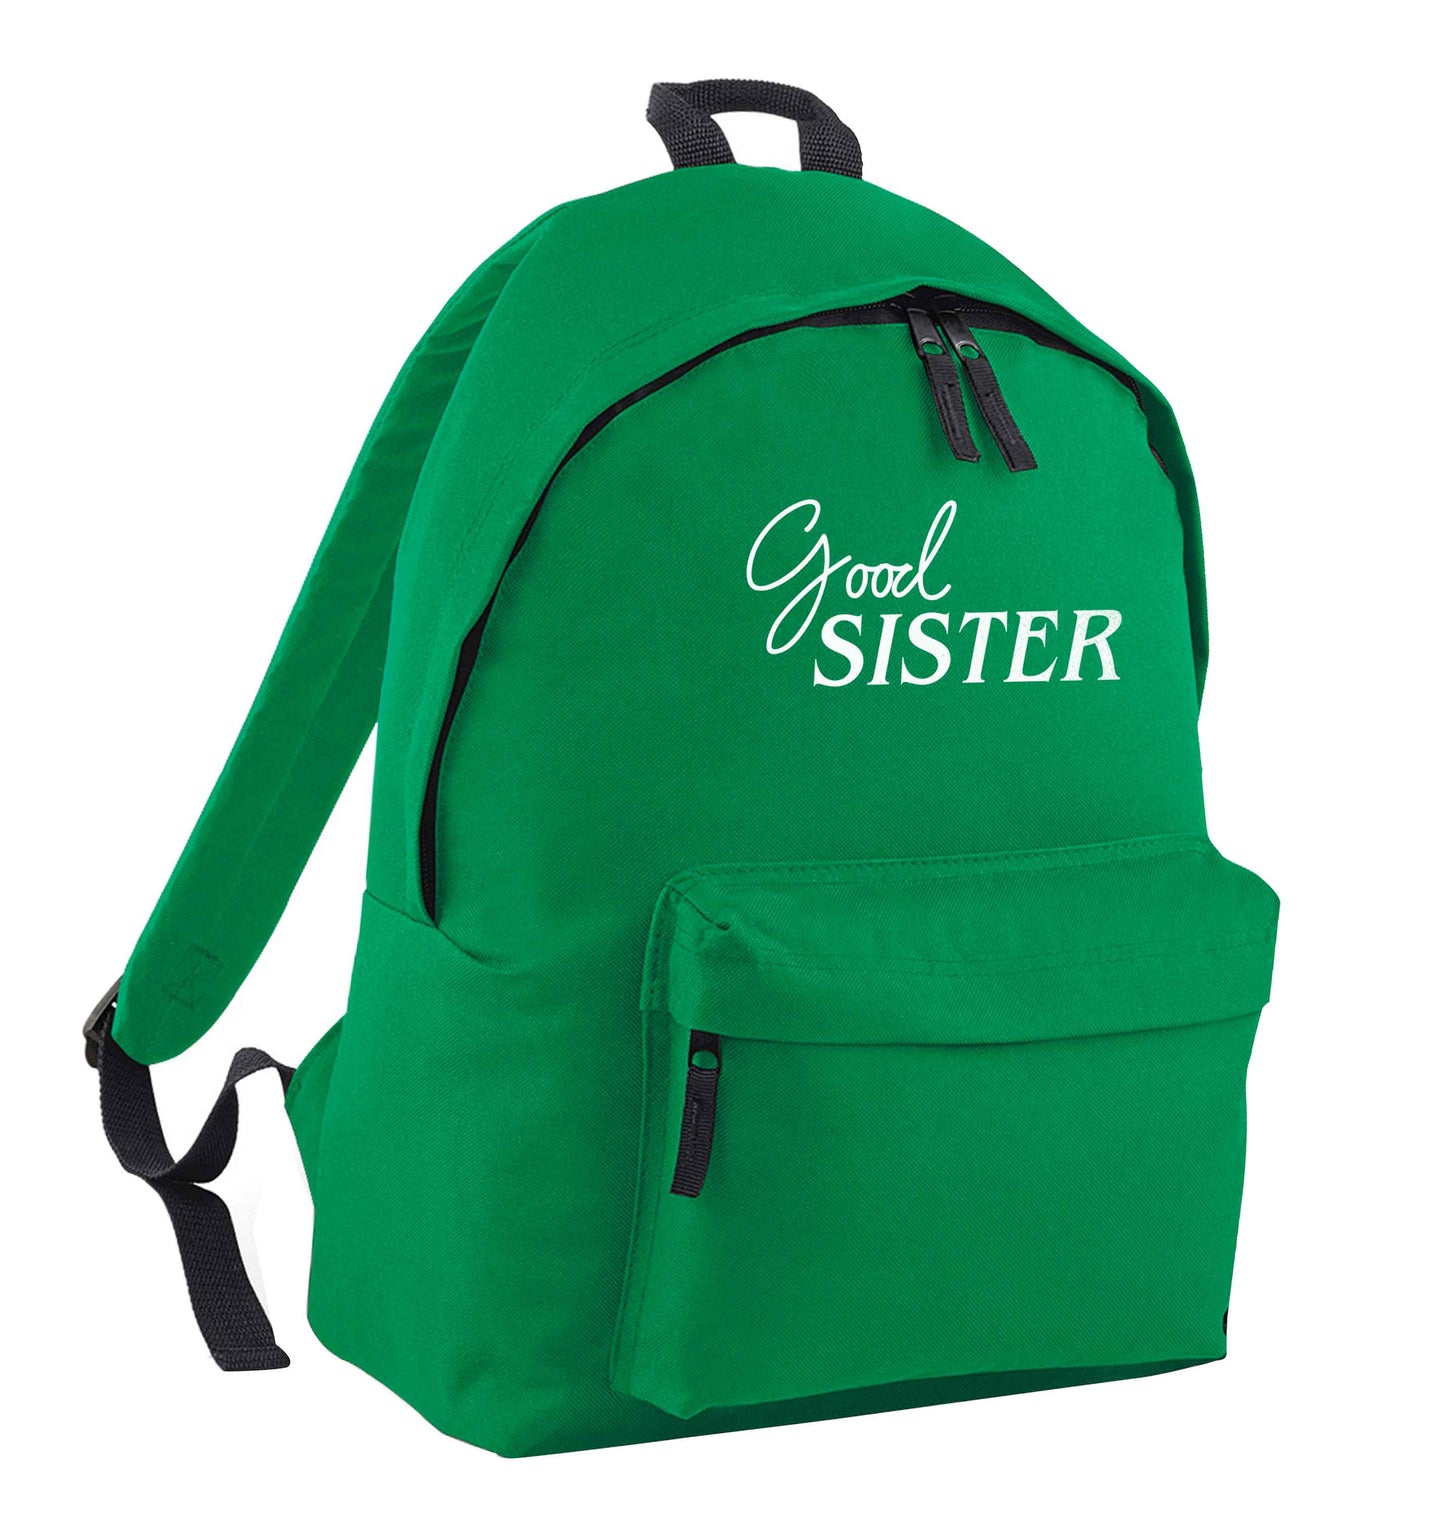 Good sister green adults backpack